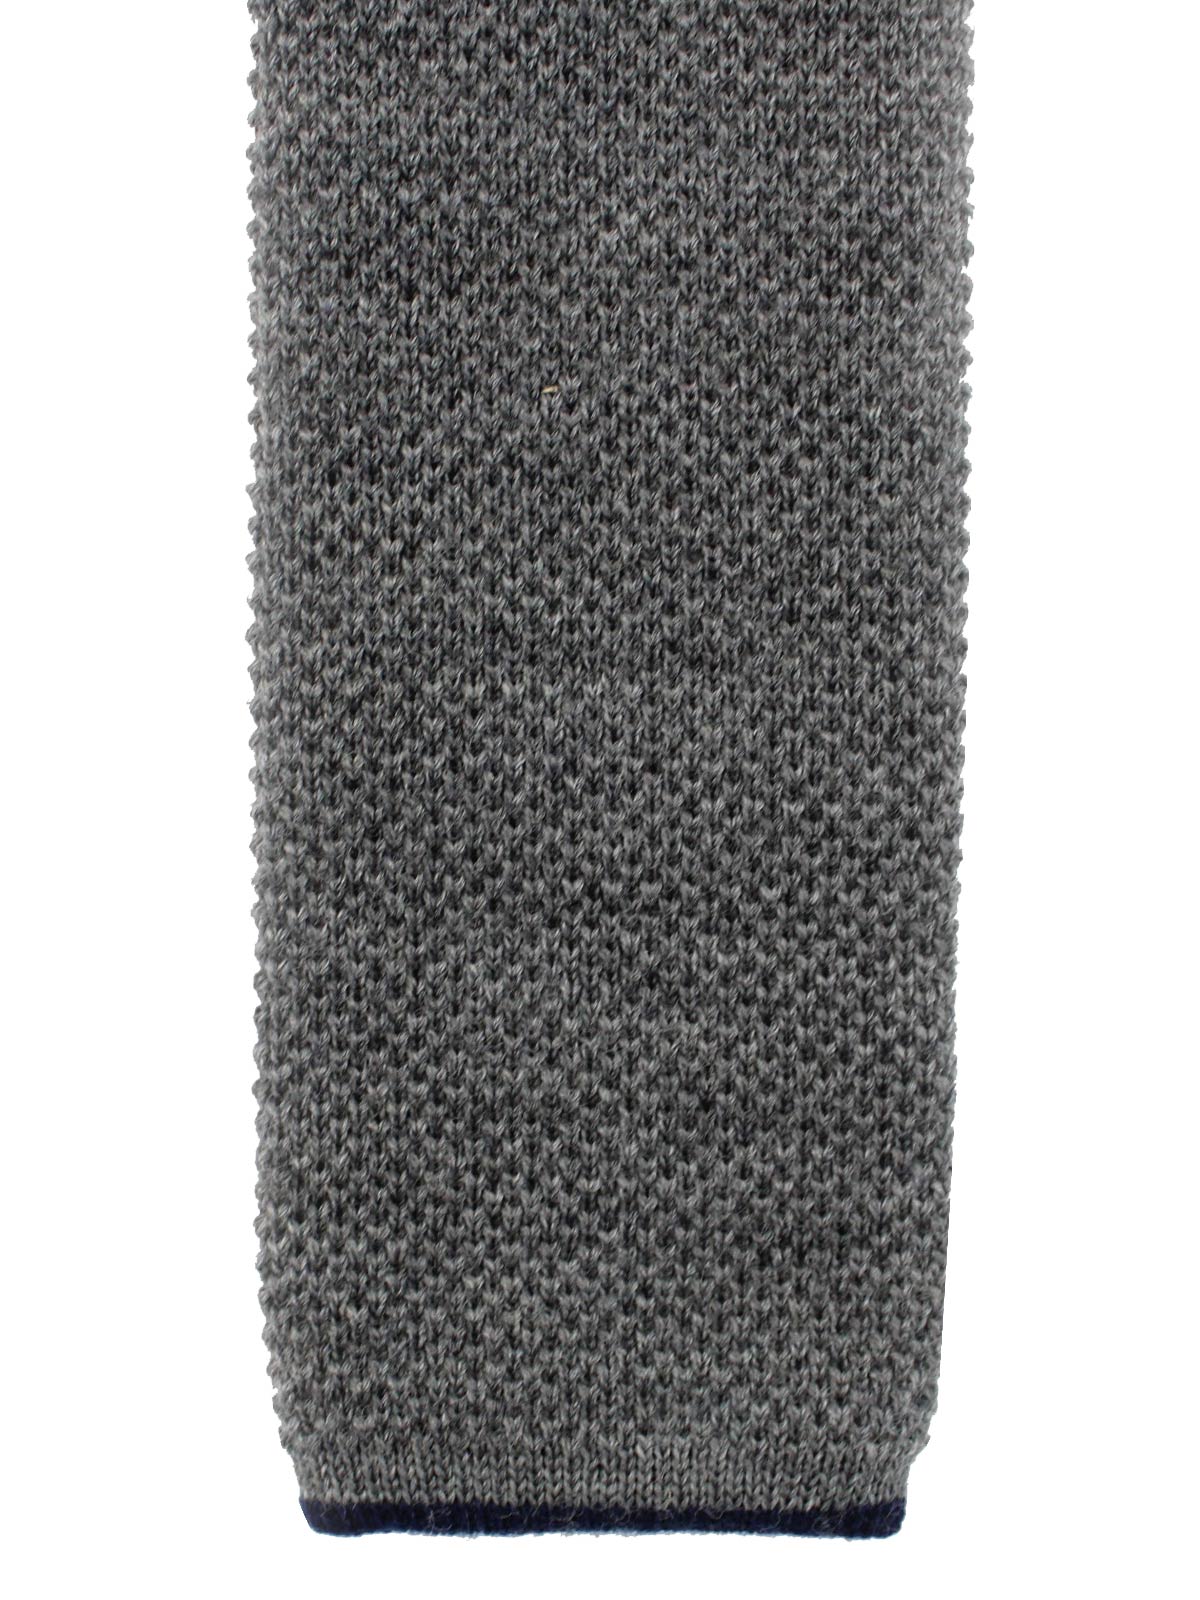 Brunello Cucinelli Square End Knitted Tie Charcoal Gray